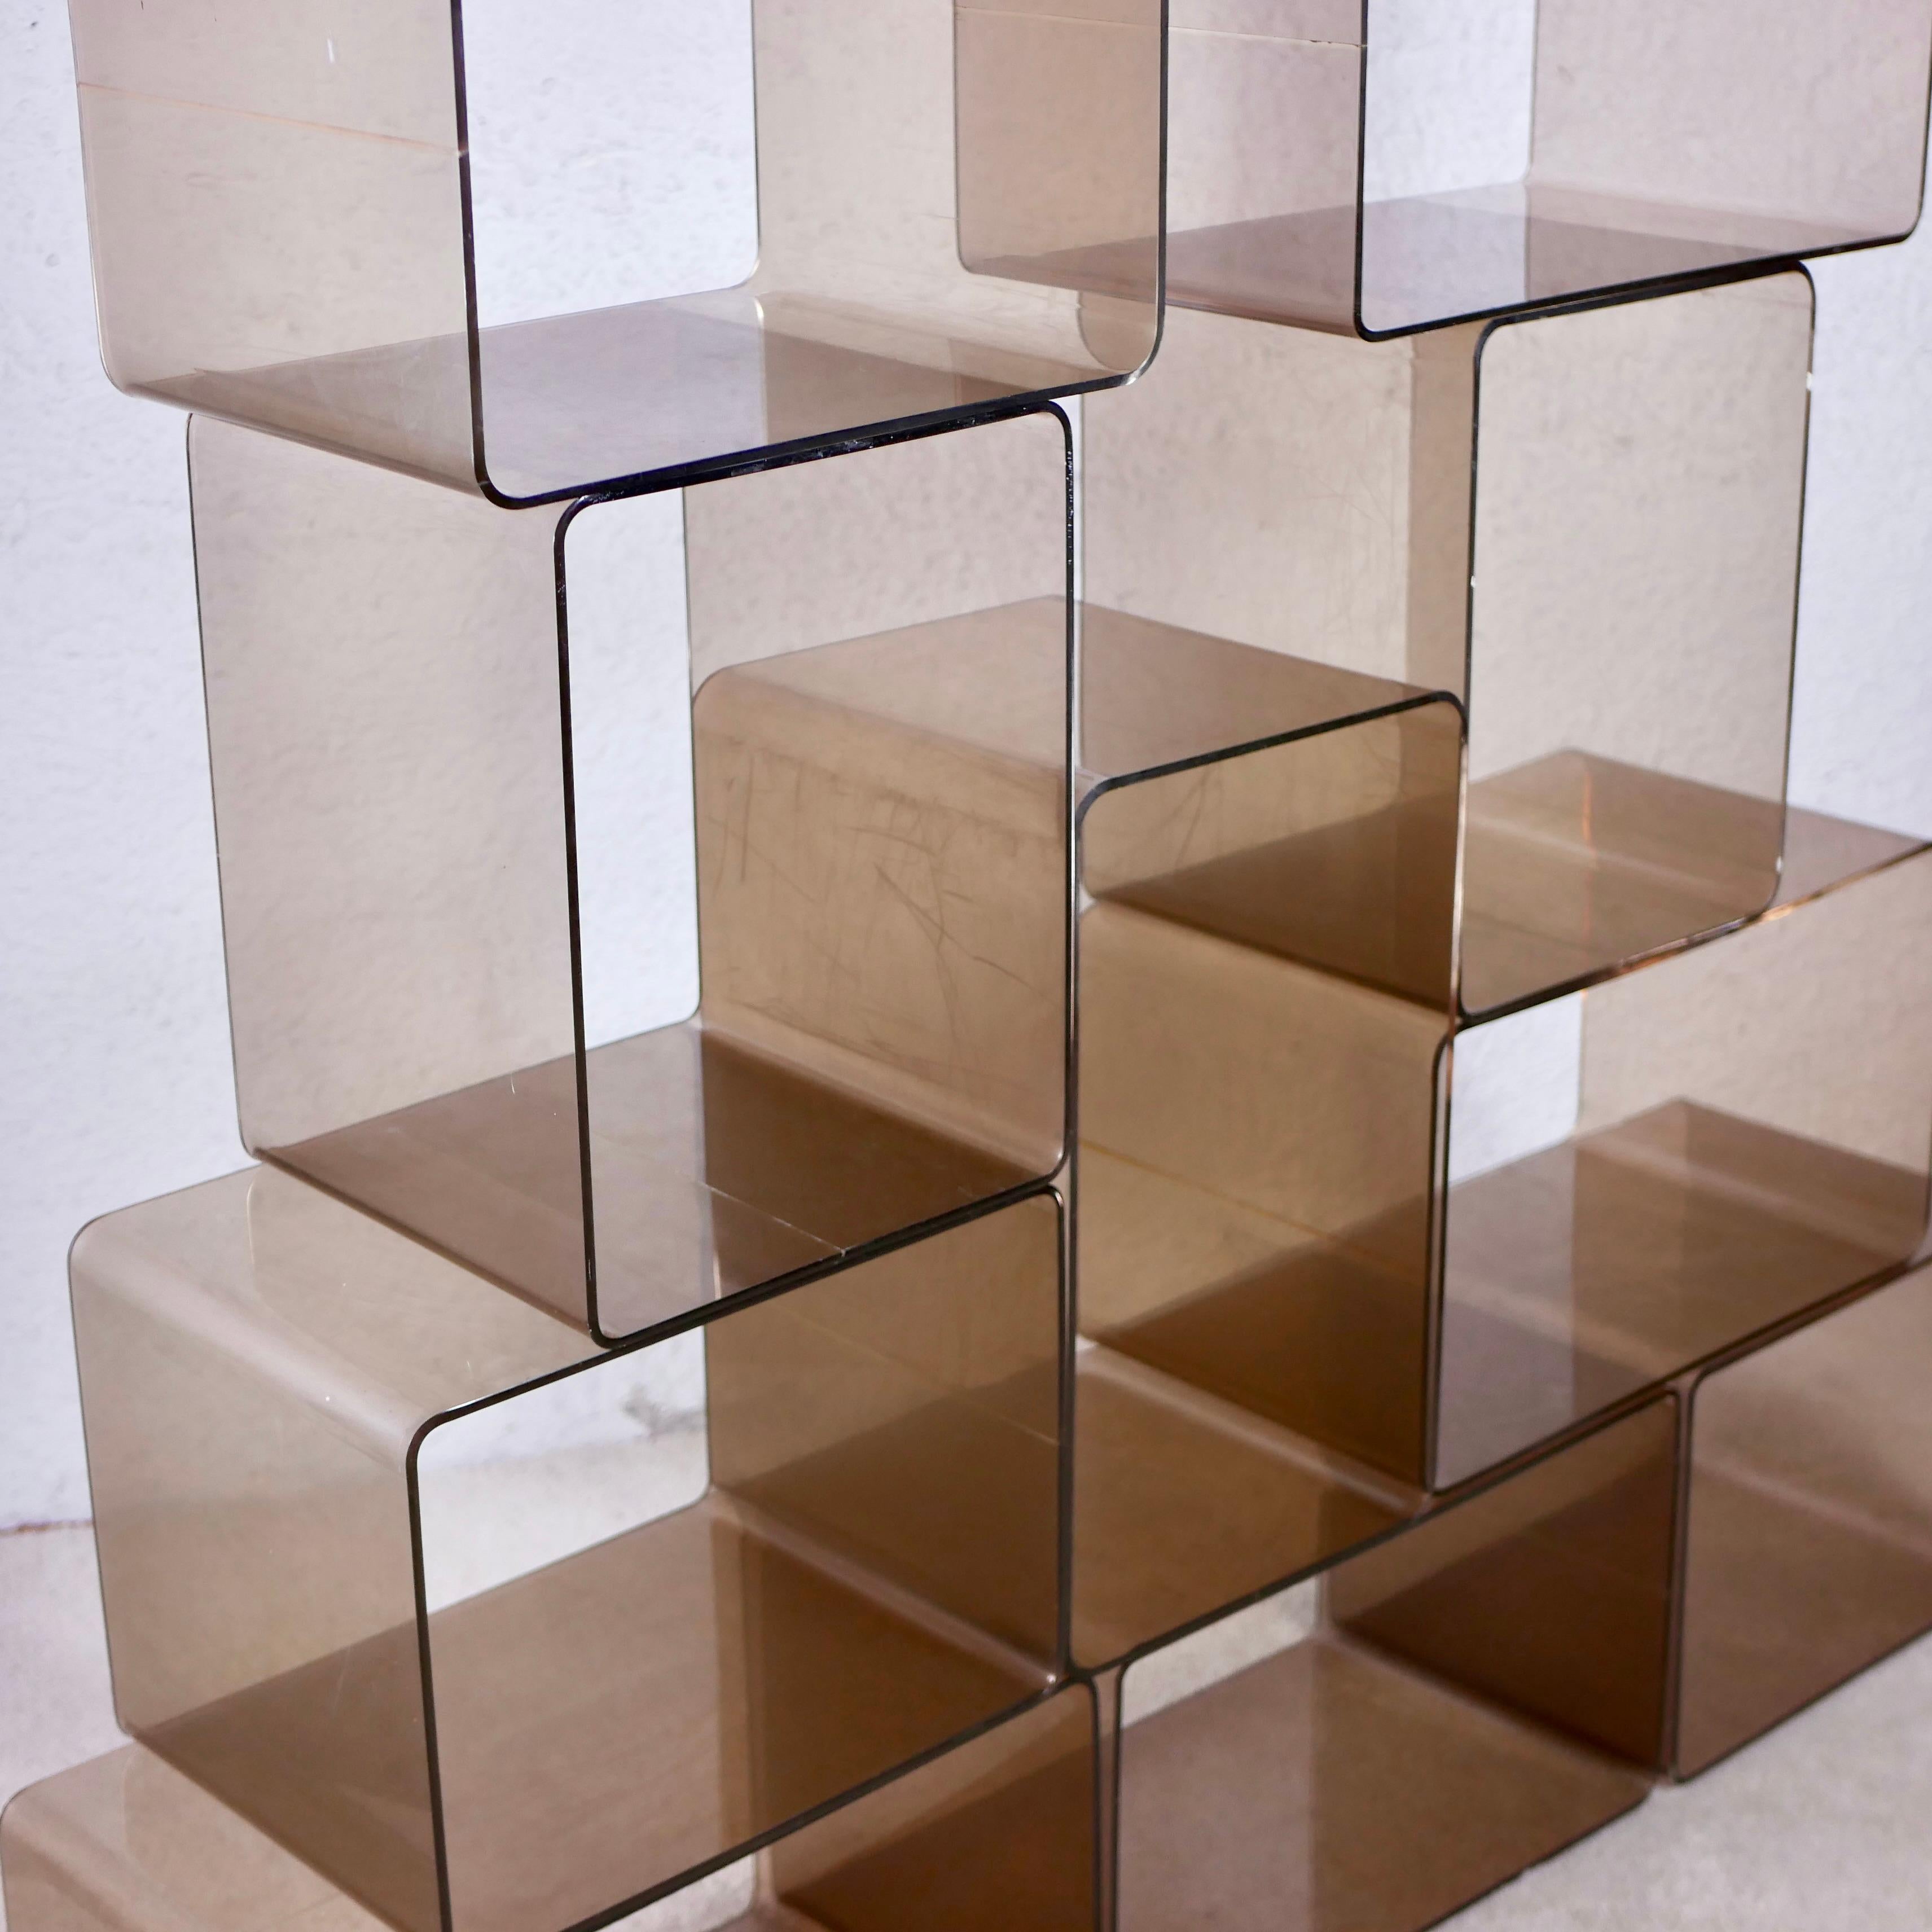 Late 20th Century 12 Pieces Modular Plexiglass Shelving System by Roche Bobois, France, 1970